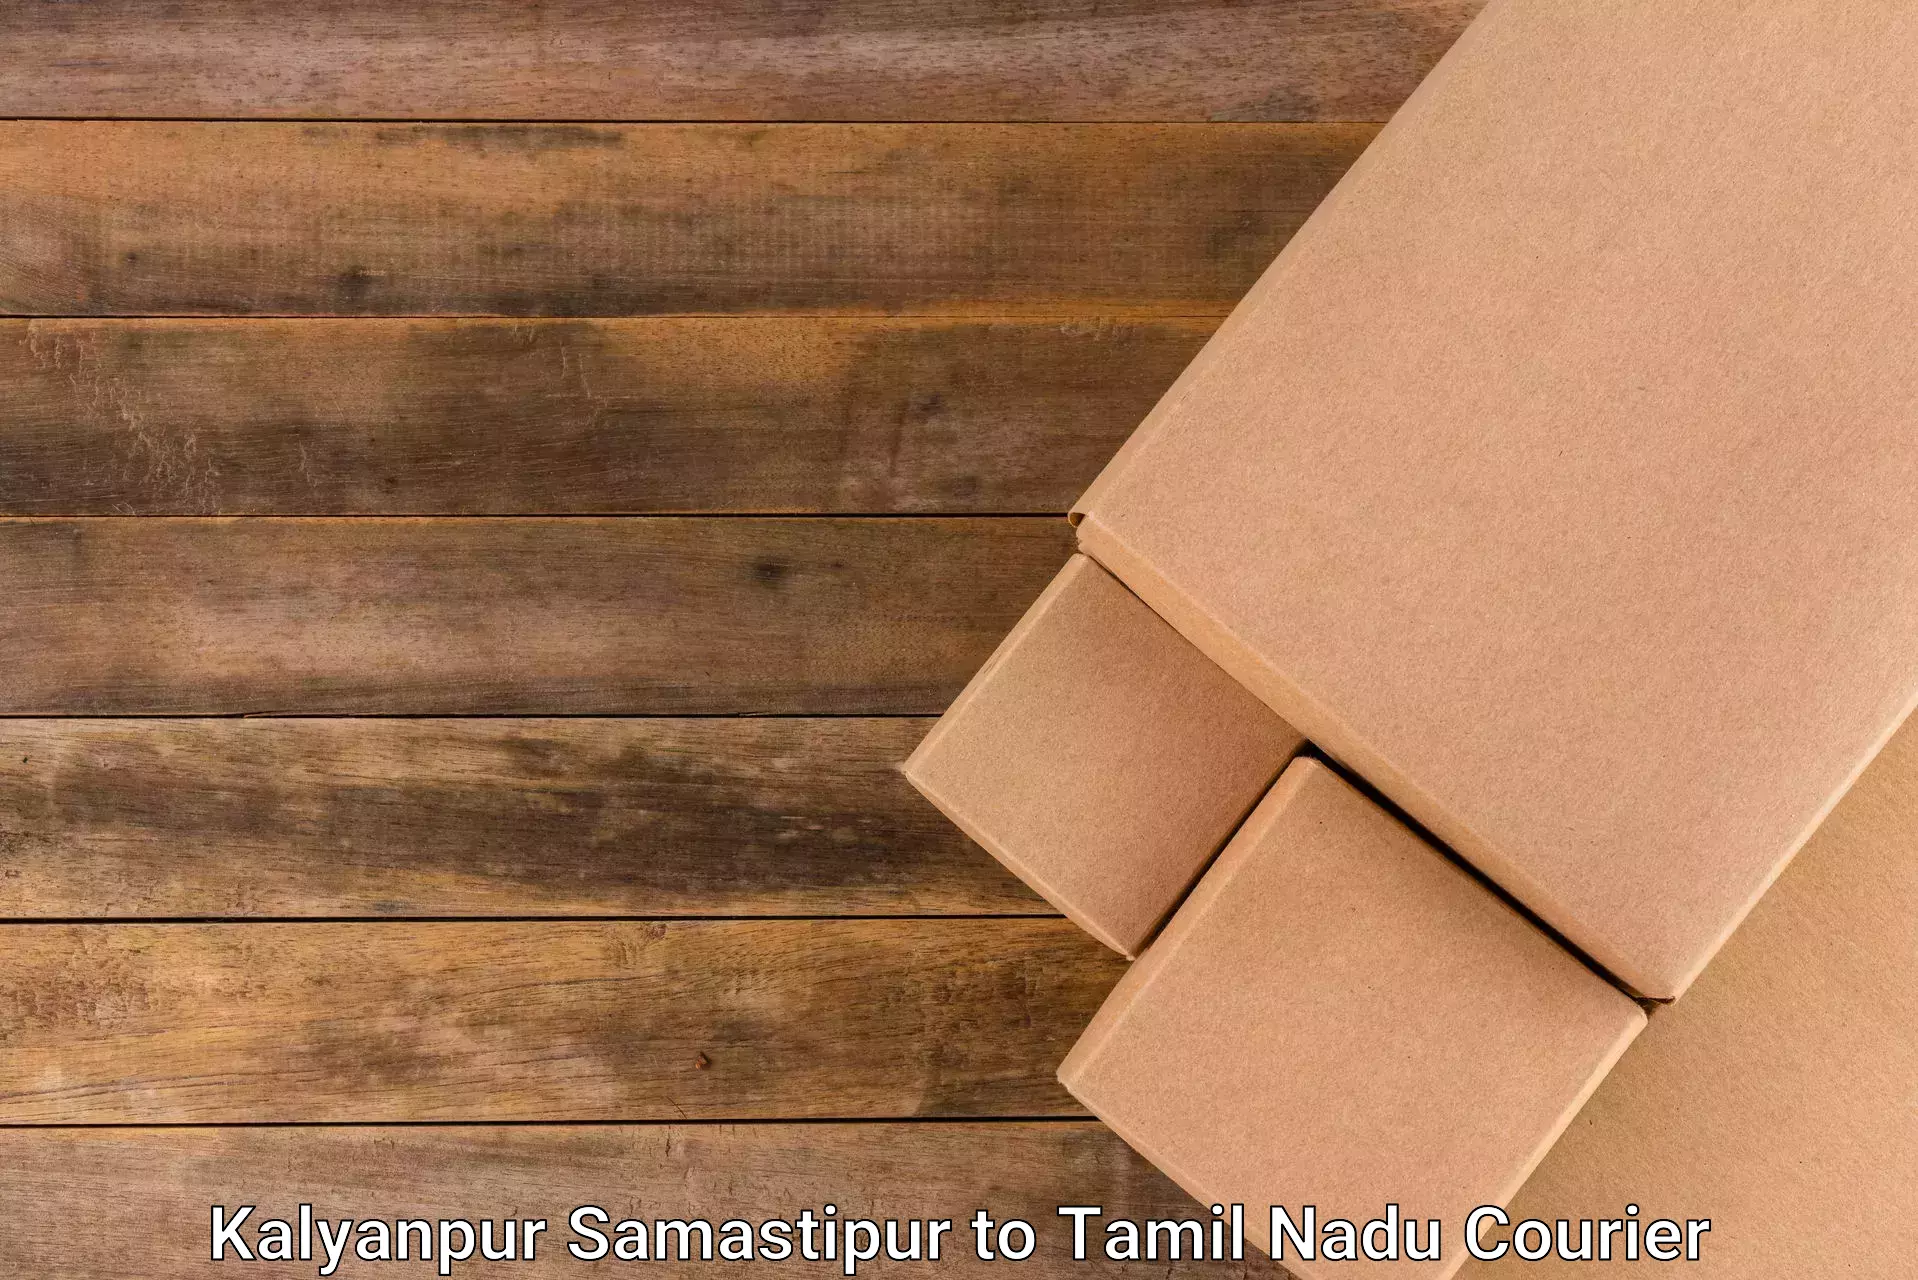 Door-to-door freight service Kalyanpur Samastipur to Shanmugha Arts Science Technology and Research Academy Thanjavur